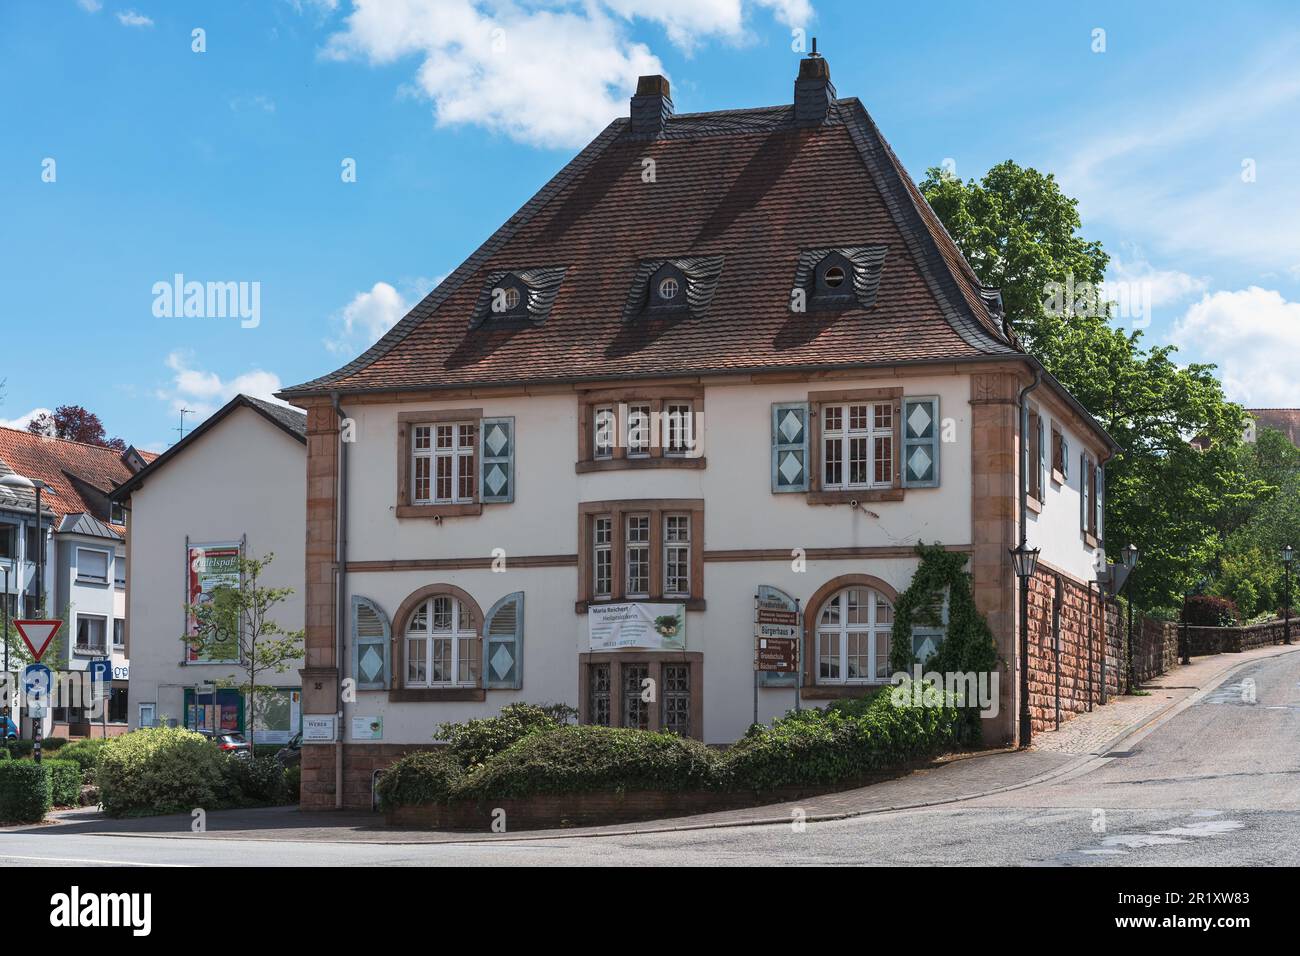 Former clergy house build around 1910, listed as cultural monument, Waldfischbach-Burgalben, Germany Stock Photo